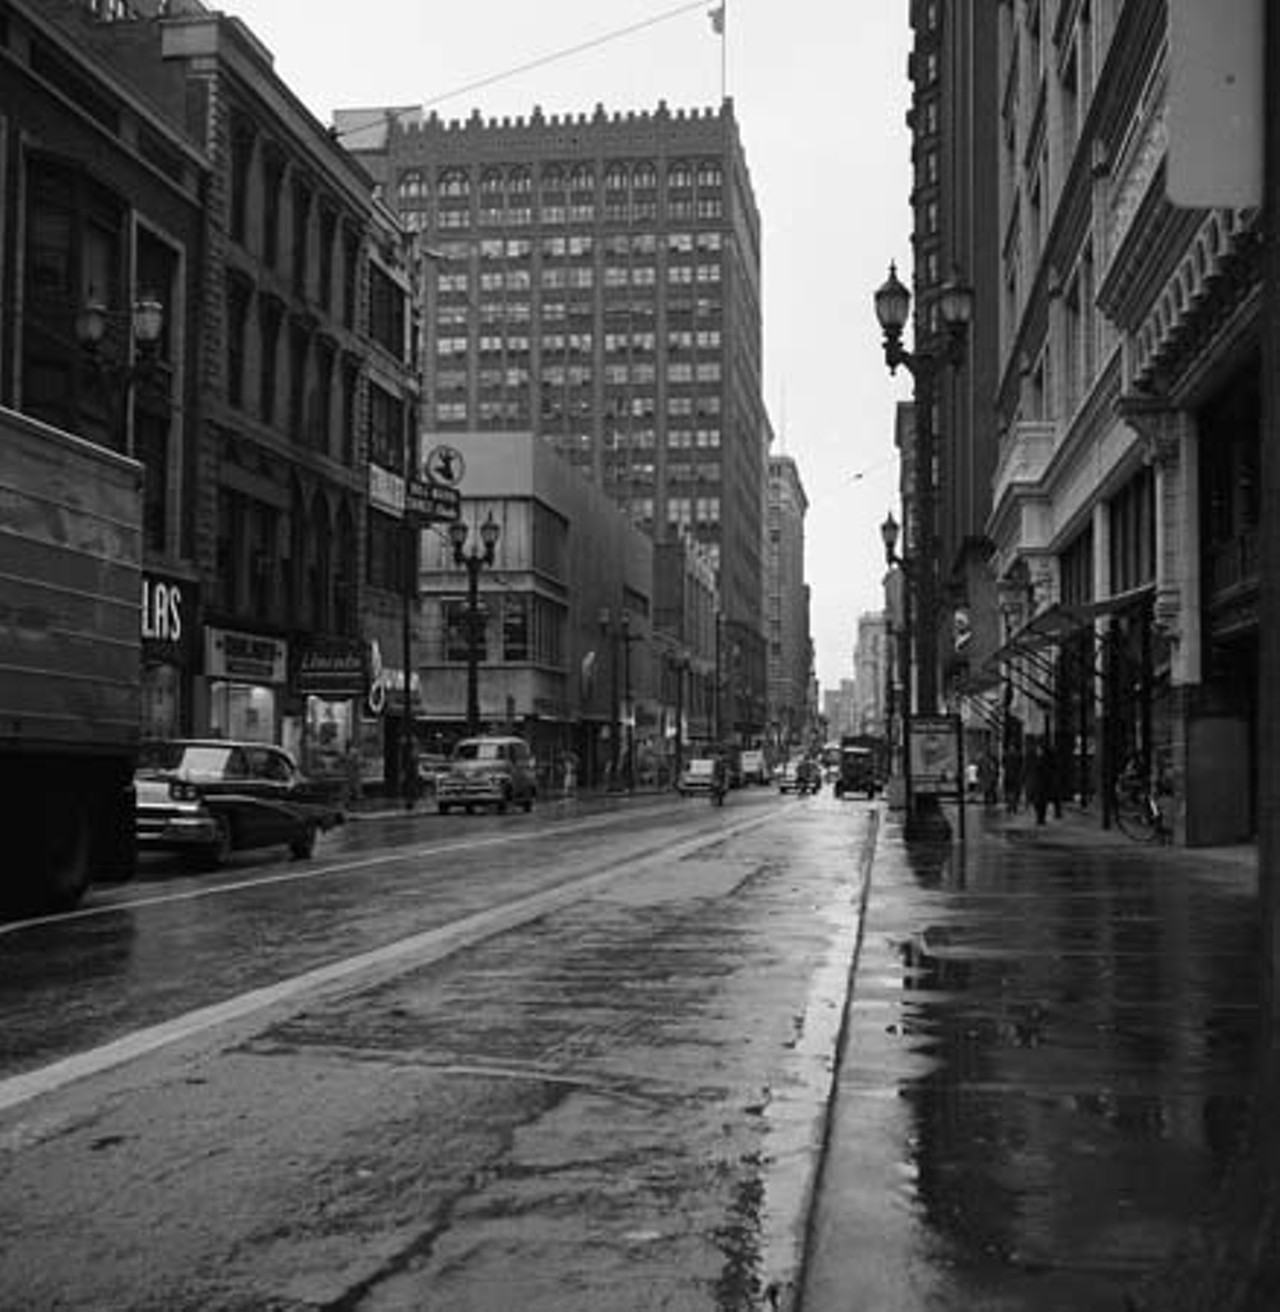 30 Awesome Vintage Photos Depict?ing? a Rainy St. Louis Day in